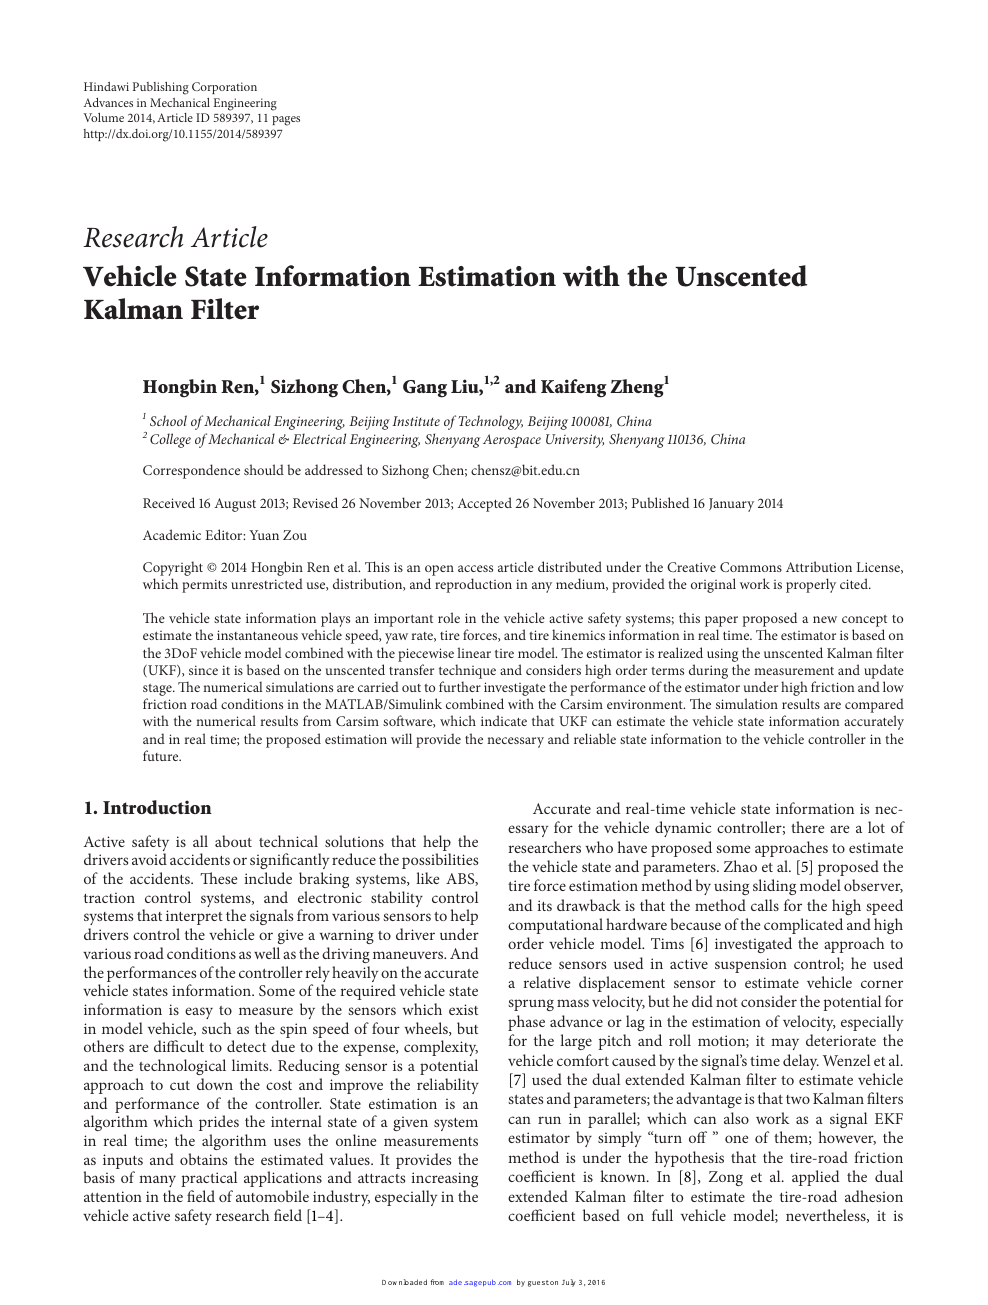 Vehicle State Information Estimation With The Unscented Kalman Filter Topic Of Research Paper In Mechanical Engineering Download Scholarly Article Pdf And Read For Free On Cyberleninka Open Science Hub